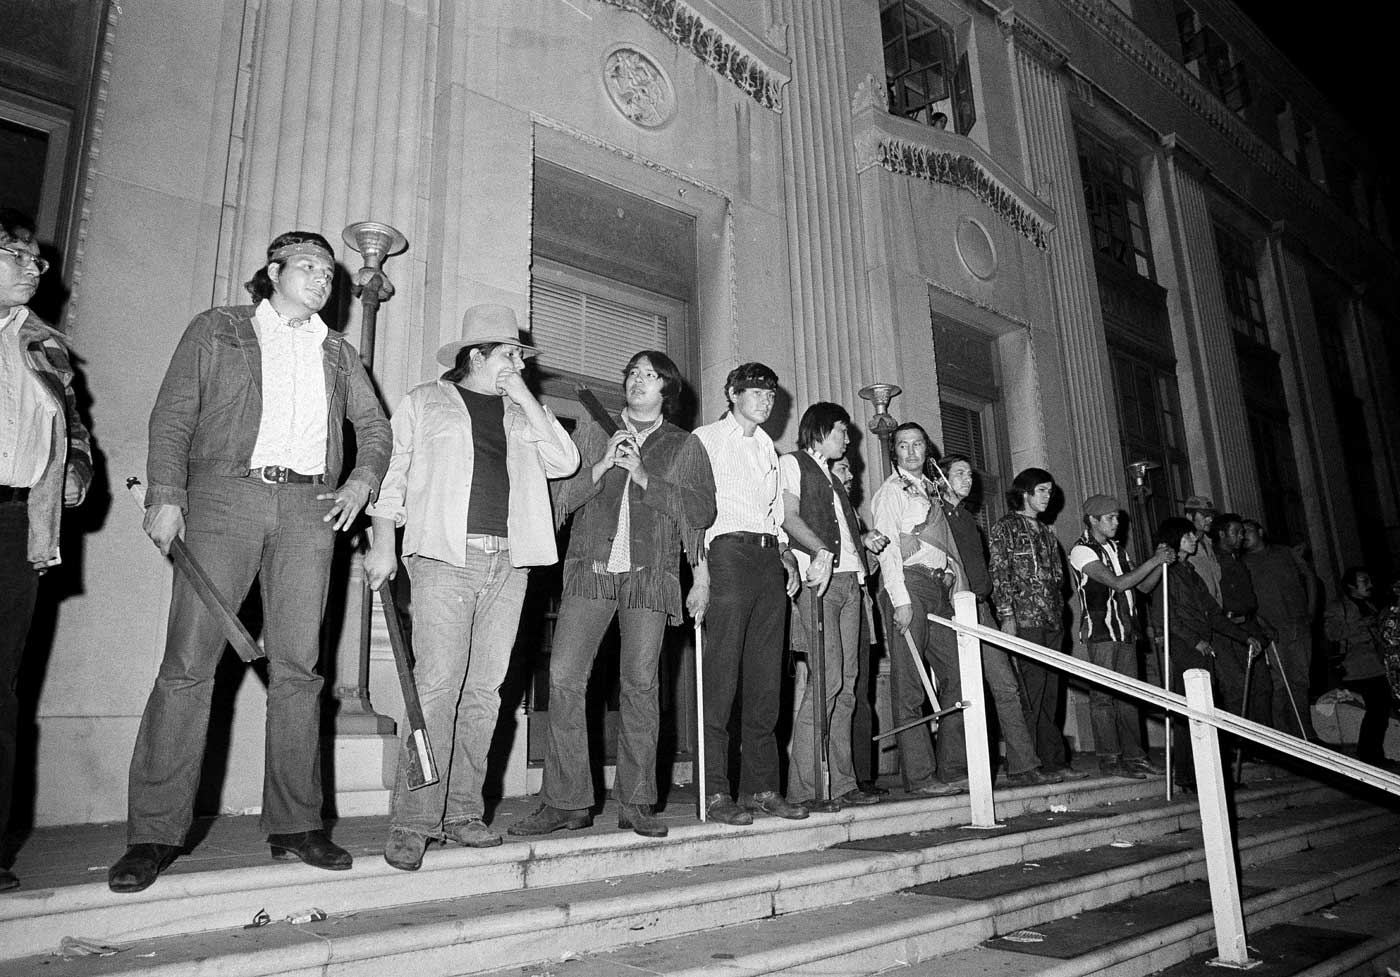 Black and white photograph of seventeen AIM men standing in front of the Bureau of Indian Affairs in Washington, D.C. Photo was taken at night and several of the men are holding clubs and sticks.